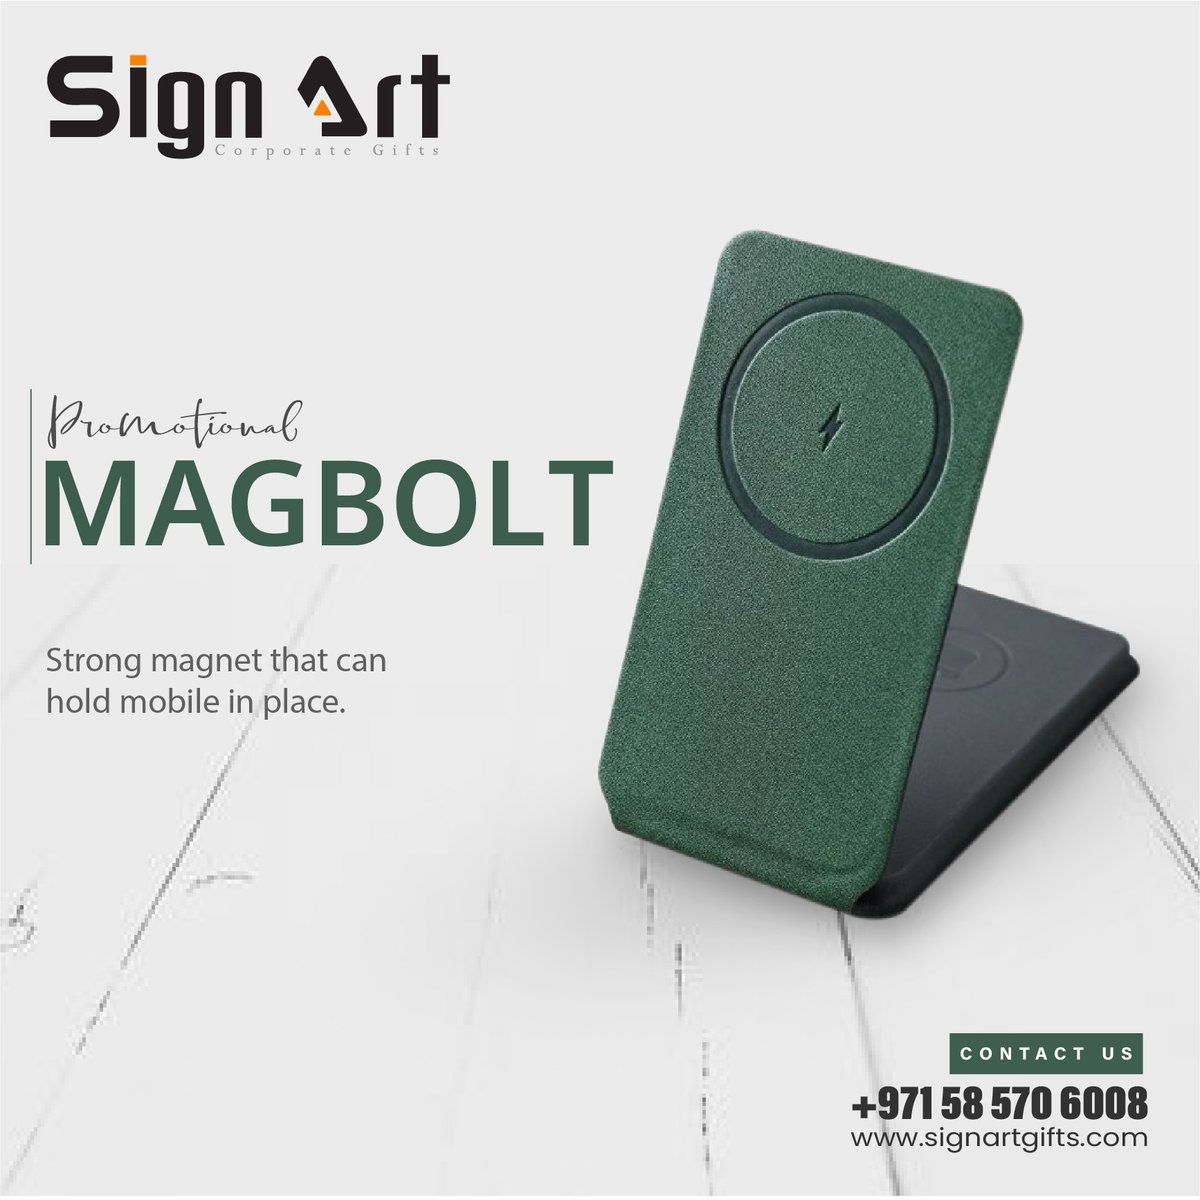 3N1 MAGBOLT
WhatsApp: 058 570 6008

Learn more: signartgifts.com

#customized #customizedgifts #promotionalproducts #travelwallet  #wallet #screenprinting #promotionalgifts #giftsindubai #officebranding #printingservices #dubaiprinting